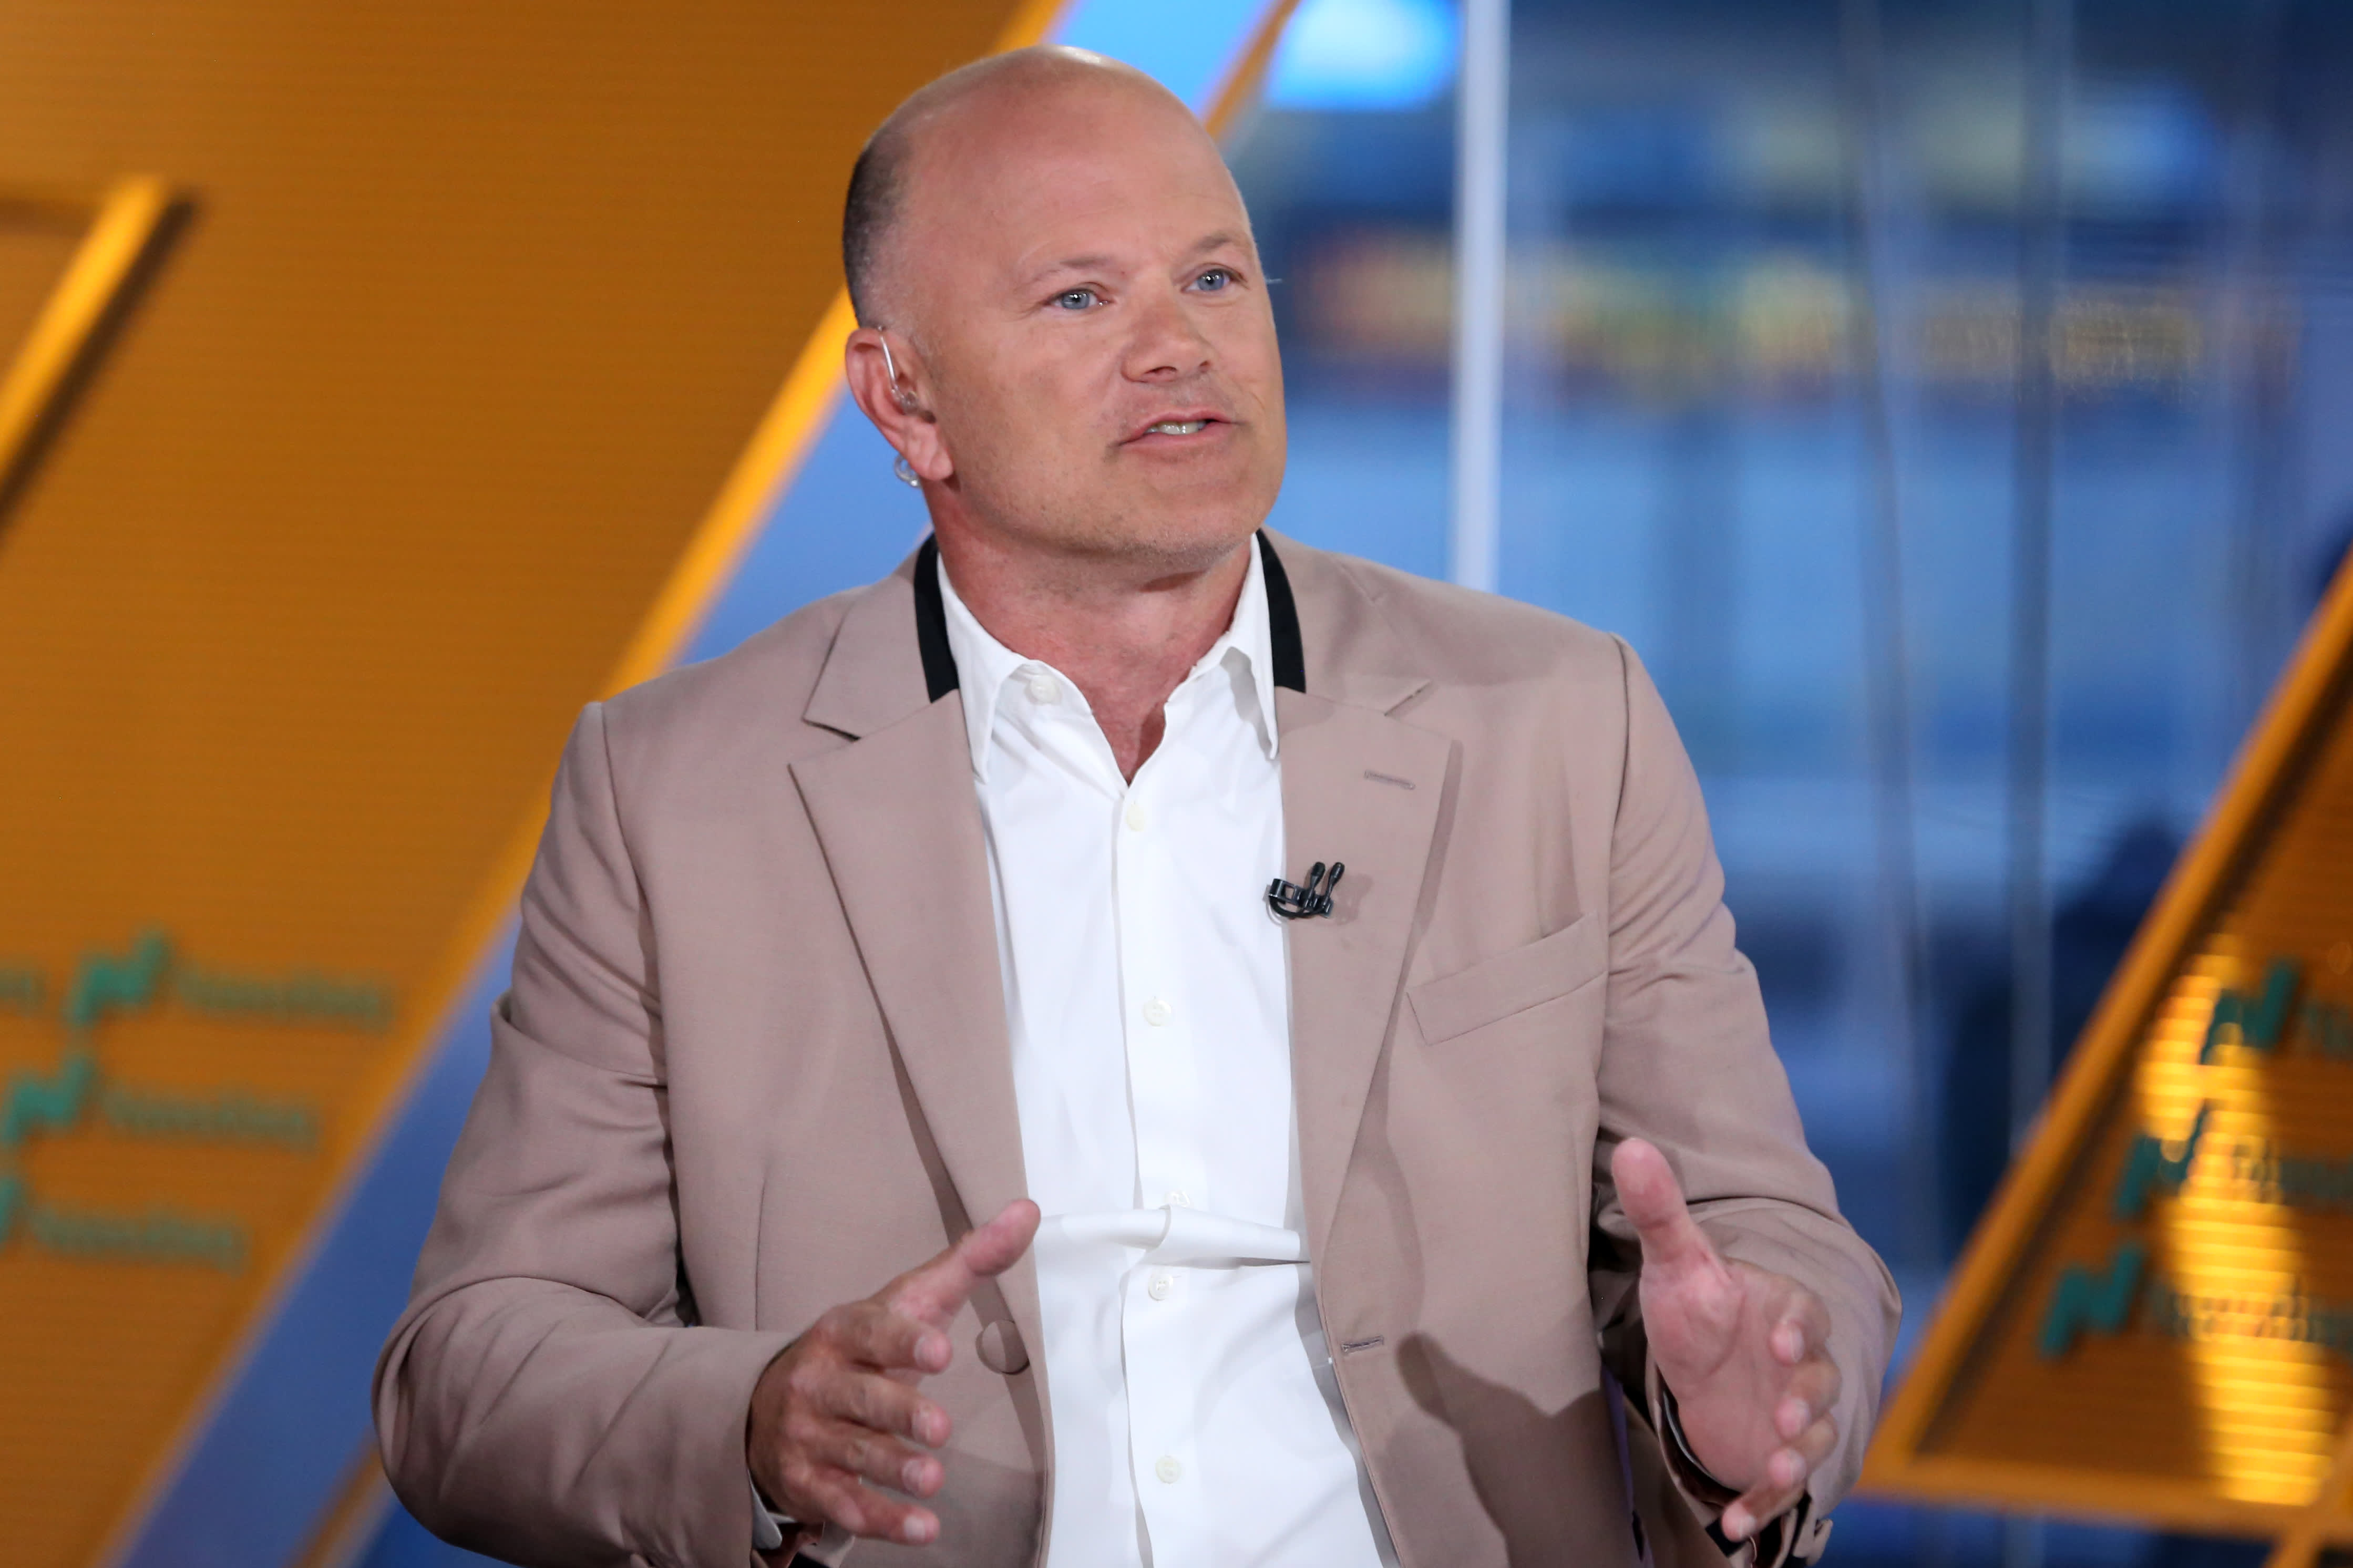 Mike Novogratz on what’s driving bitcoin’s run to $30k and where he sees it going from here